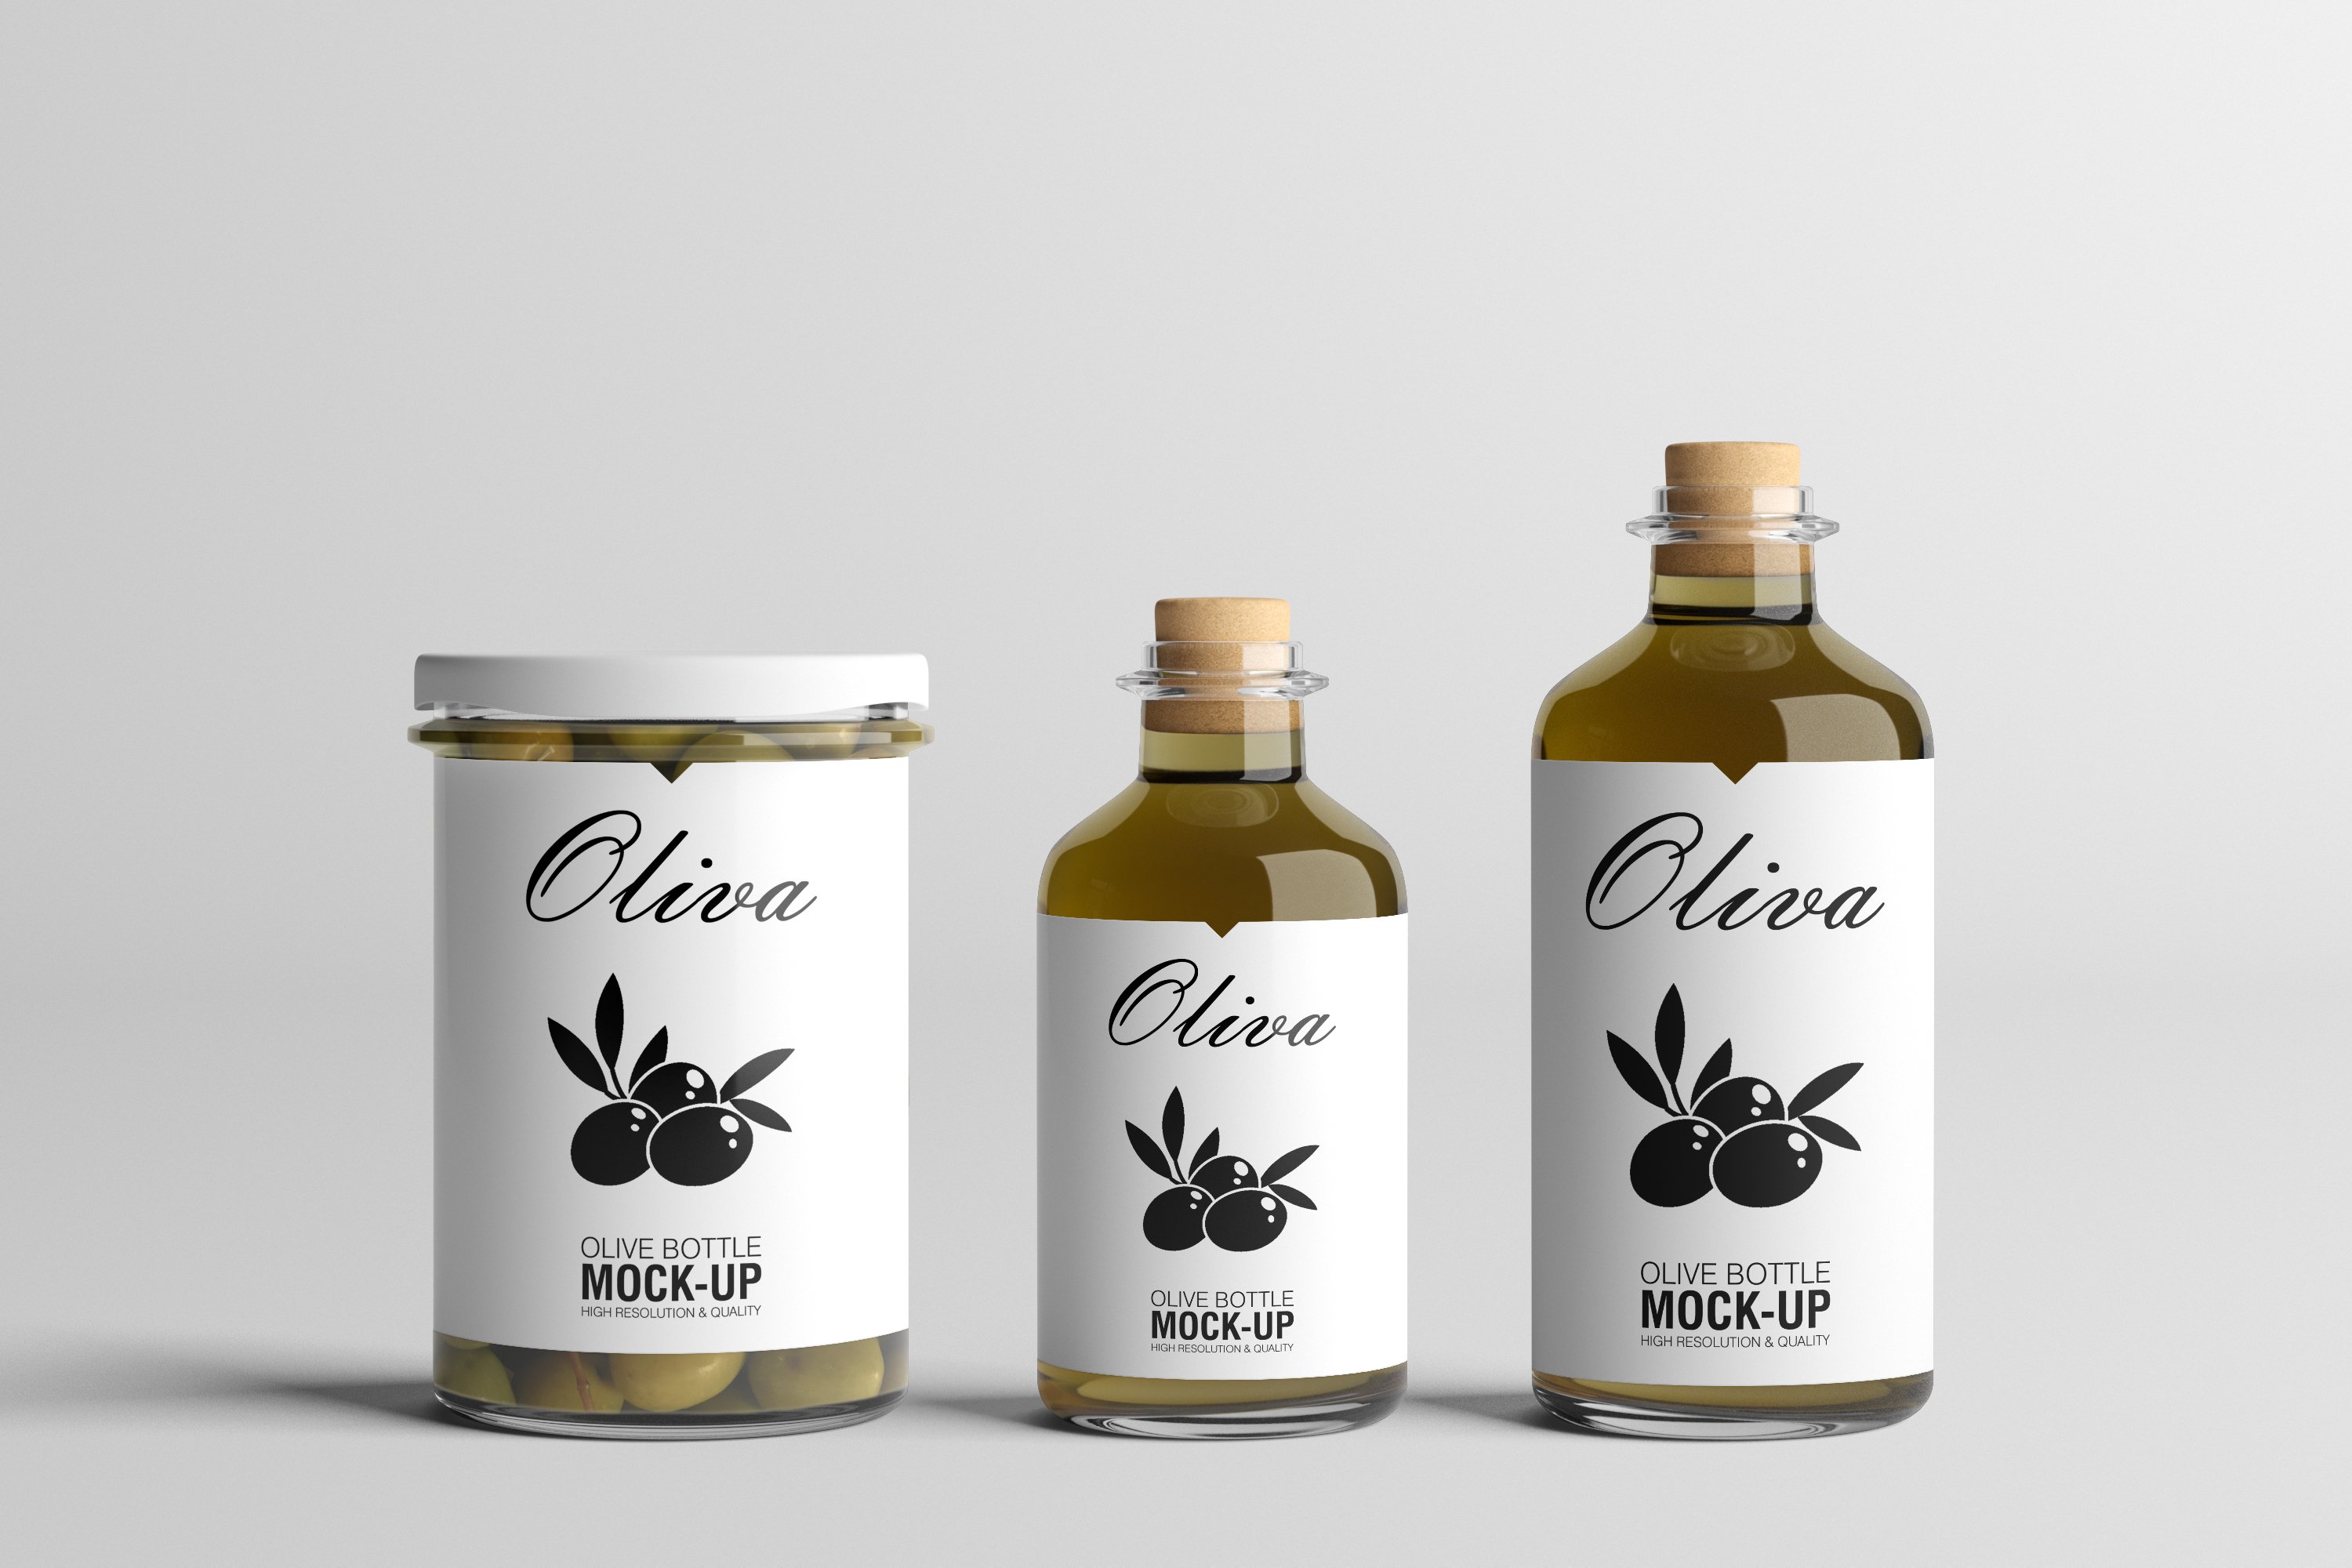 Three options of bottle for olive oil with thematic labels.